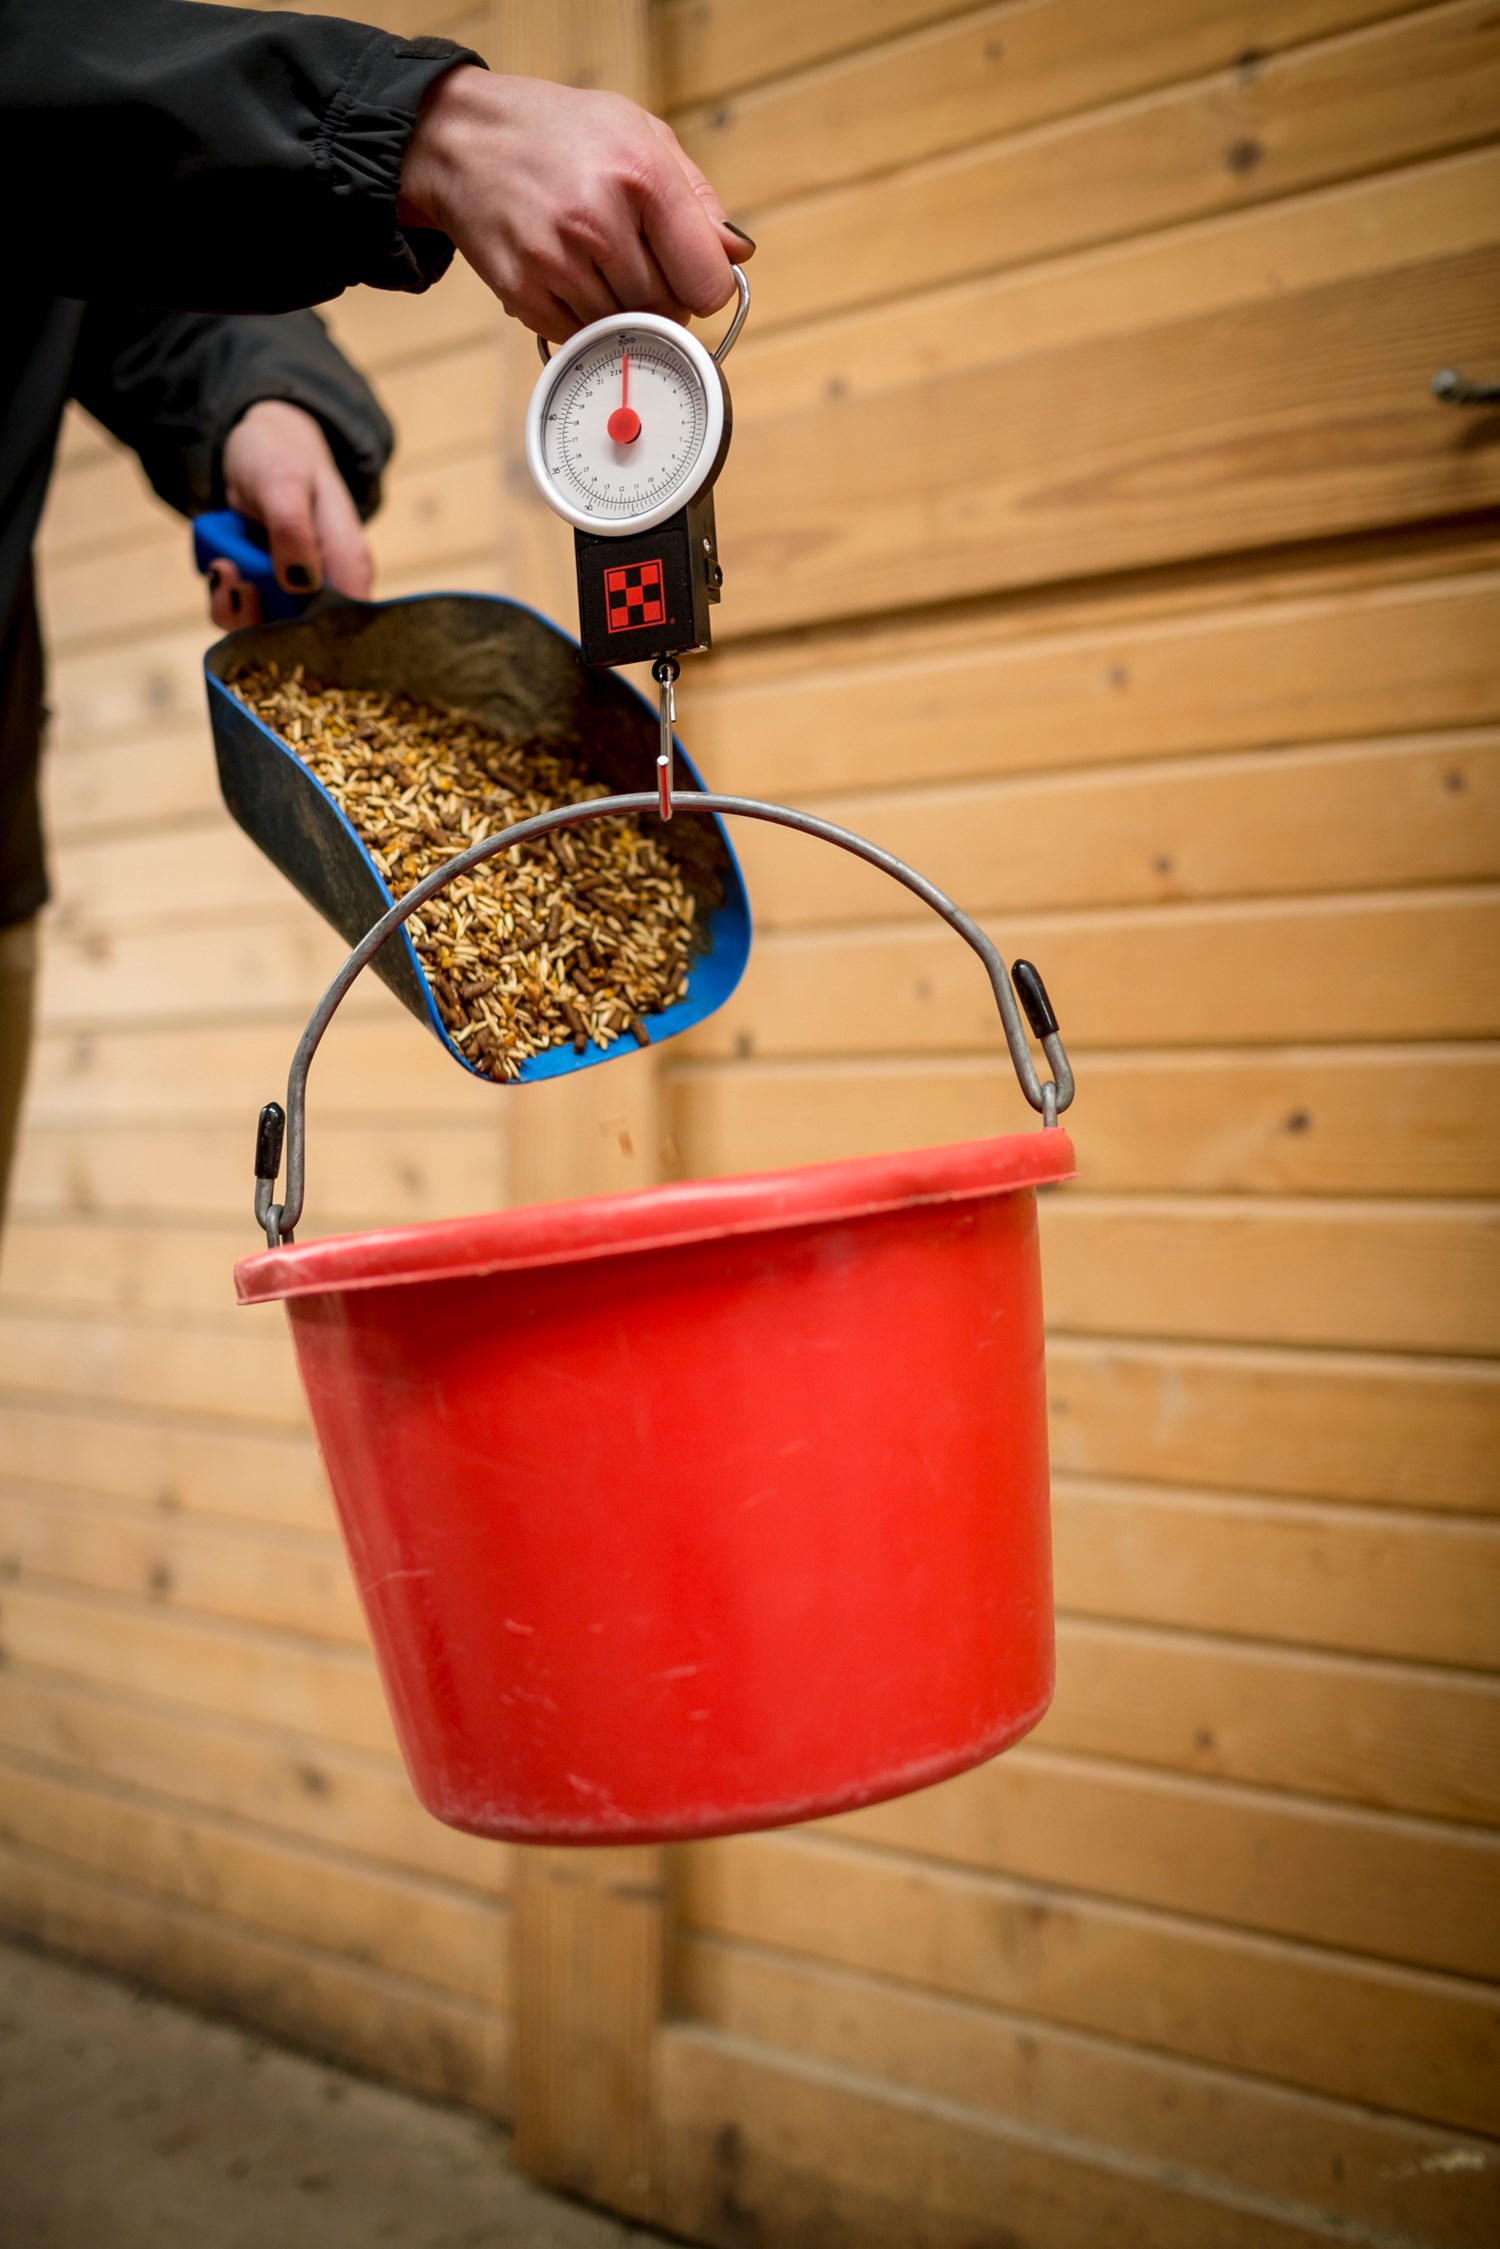 A woman pouring grain into a bucket that is attached to a hanging scale.